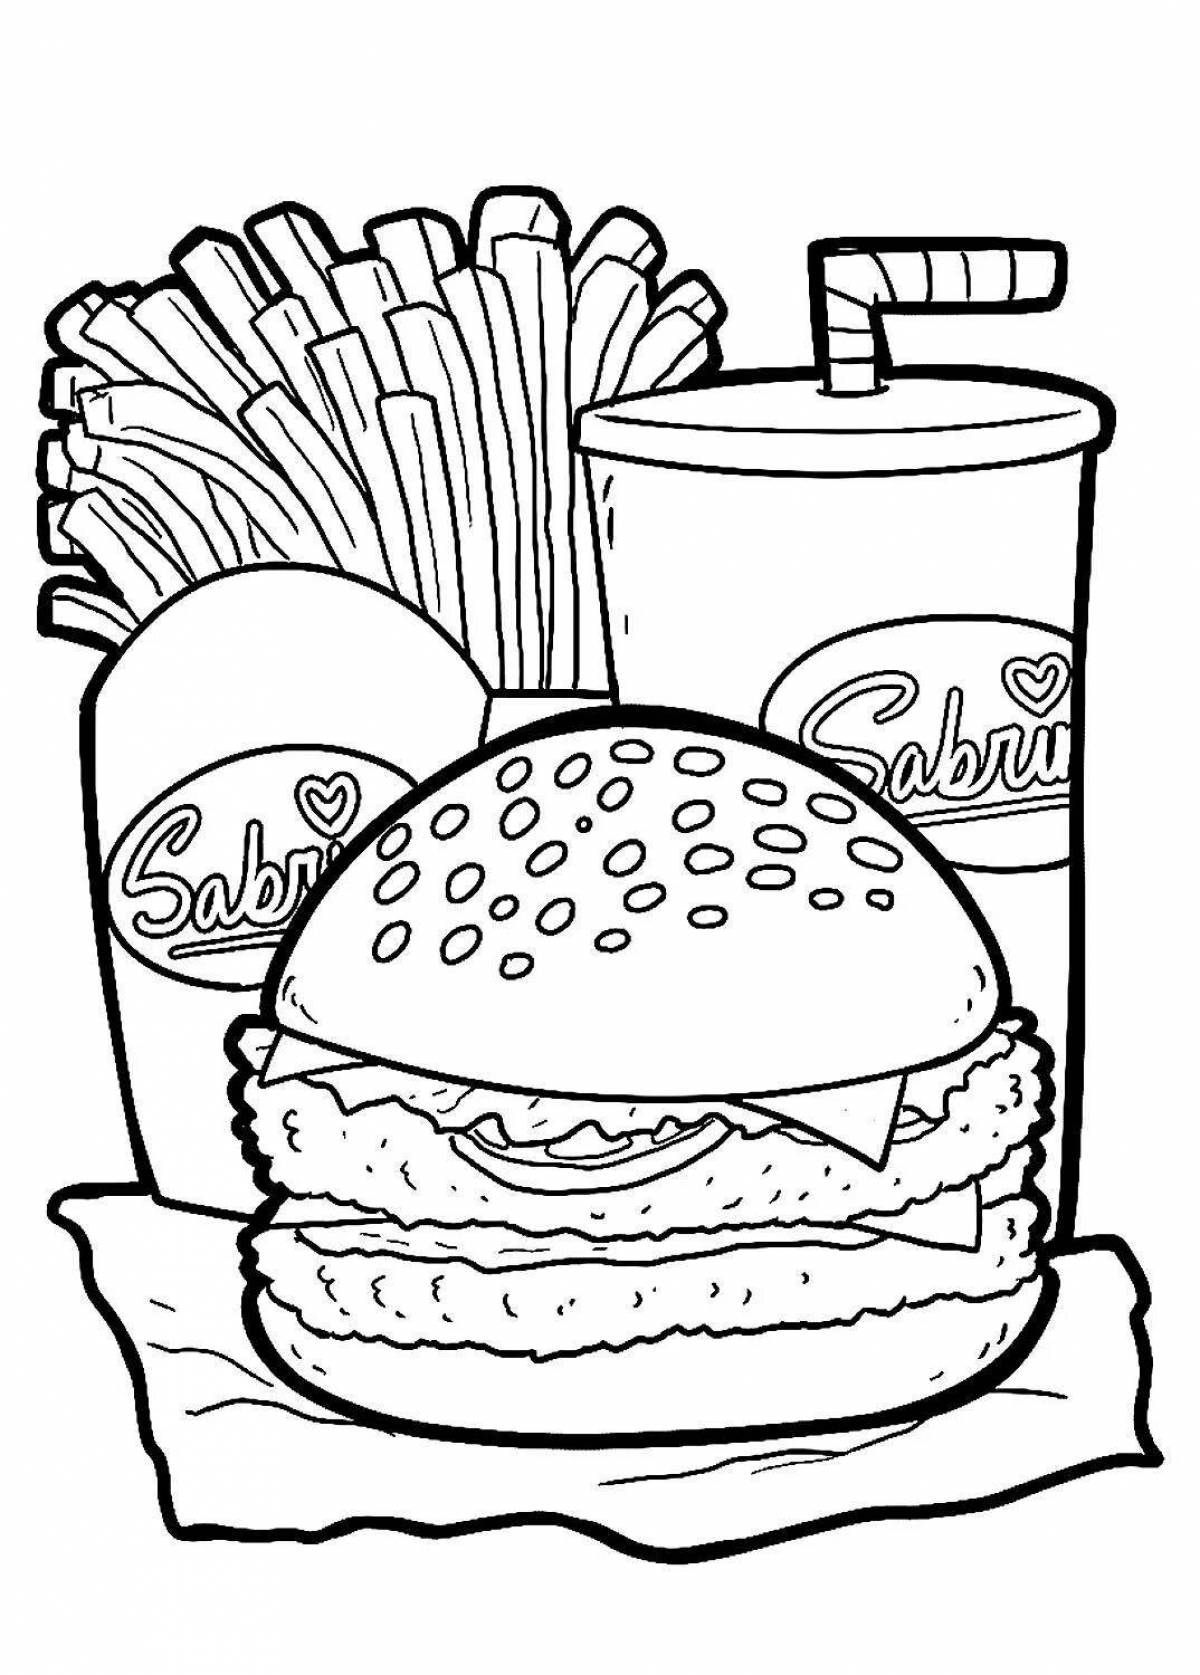 Dazzling boxy boo burger coloring page